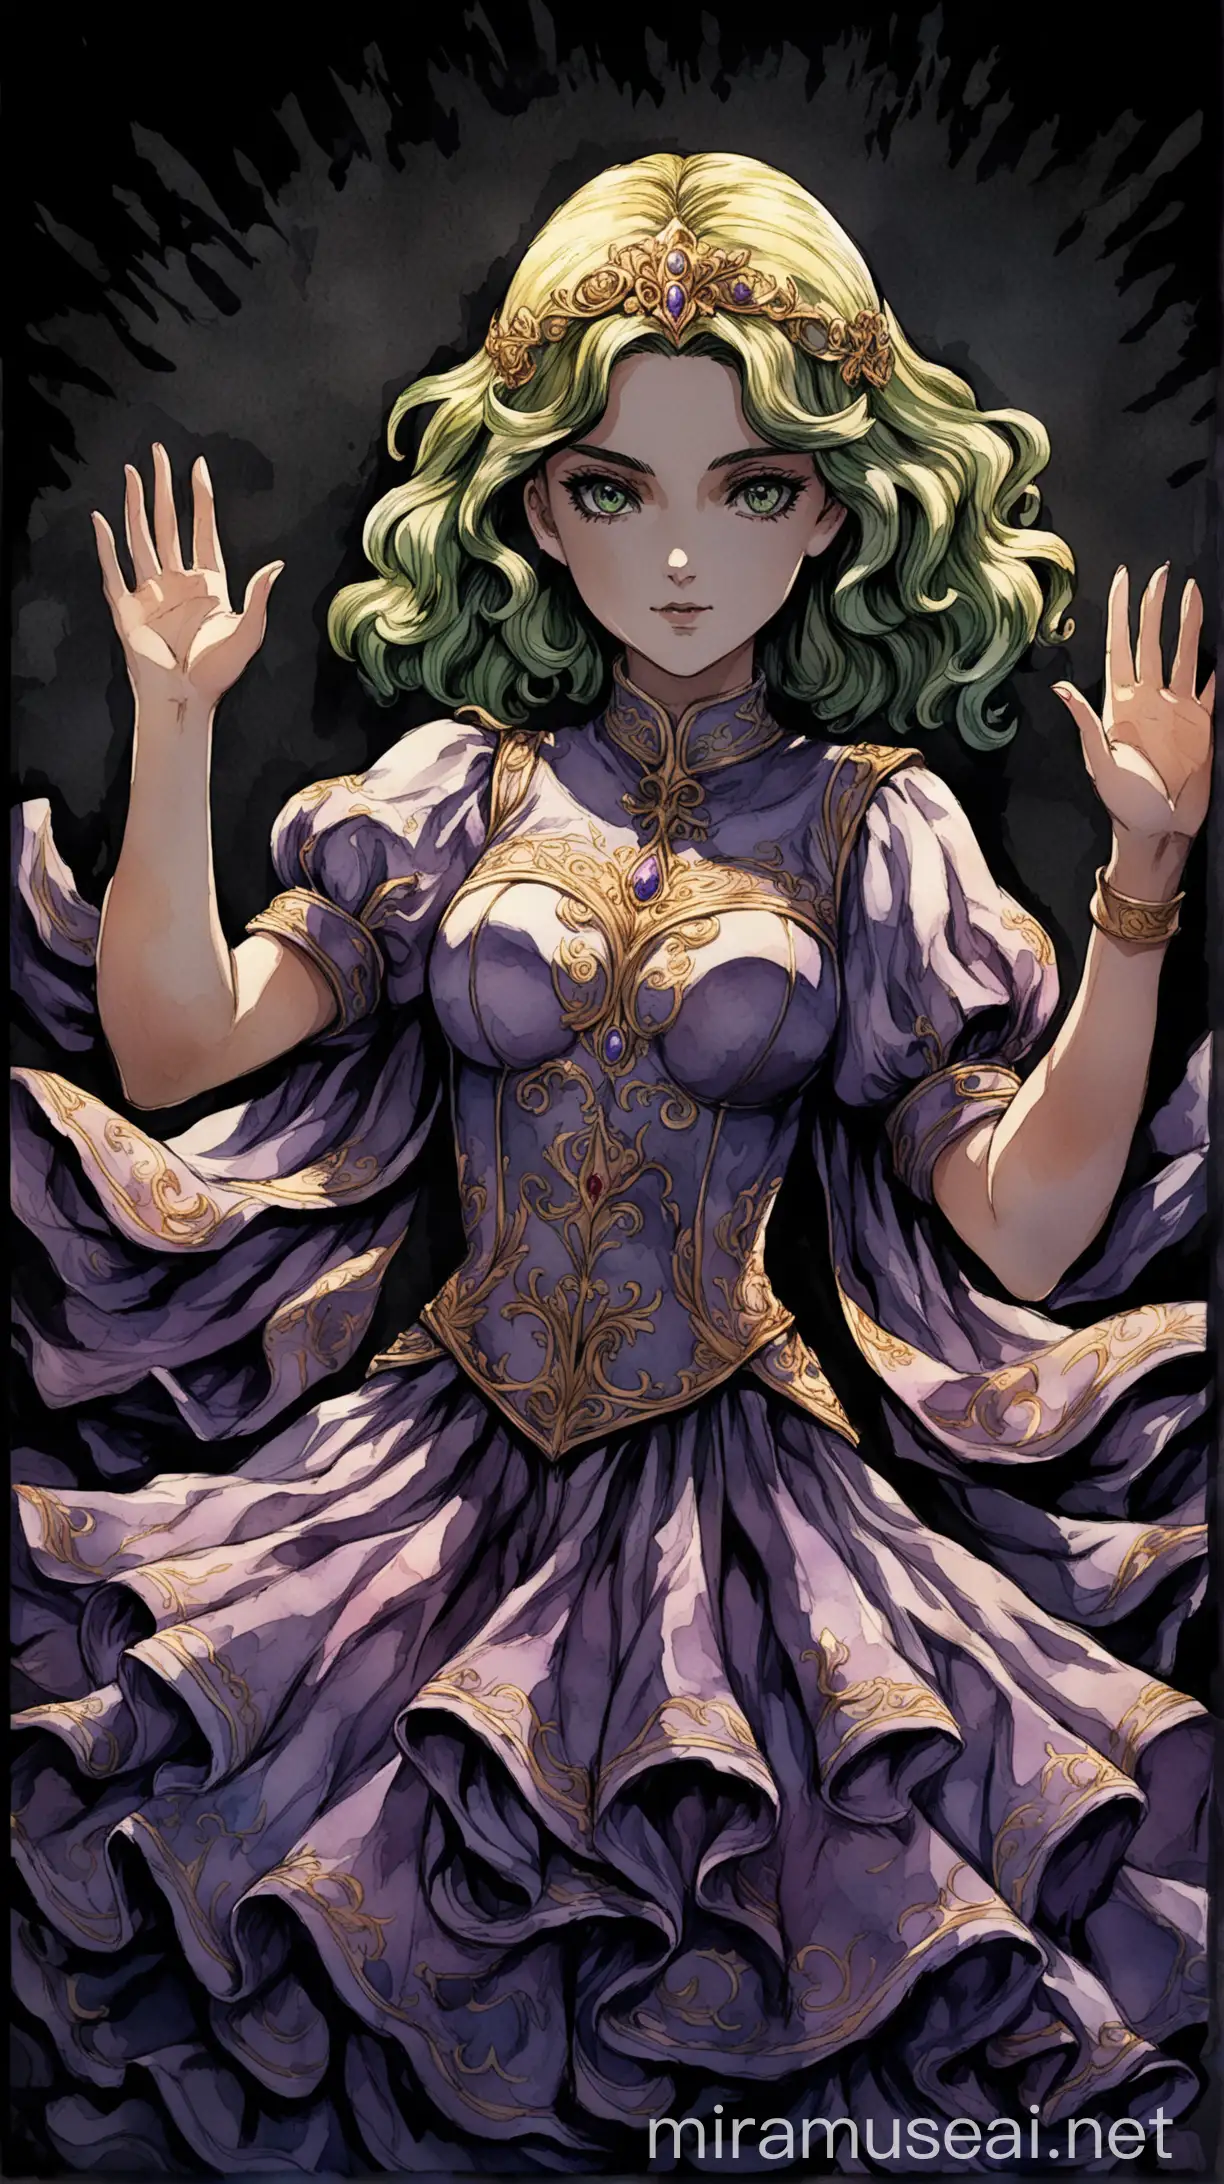 Subject: The central focus of the image is a beautiful and elegant girl holding her hands up because she got caught.
Background: dark background painted in watercolor
Style/Coloring: Colors adds depth and richness to the scene. Textures and shadows make the picture more detailed. JoJo reference.